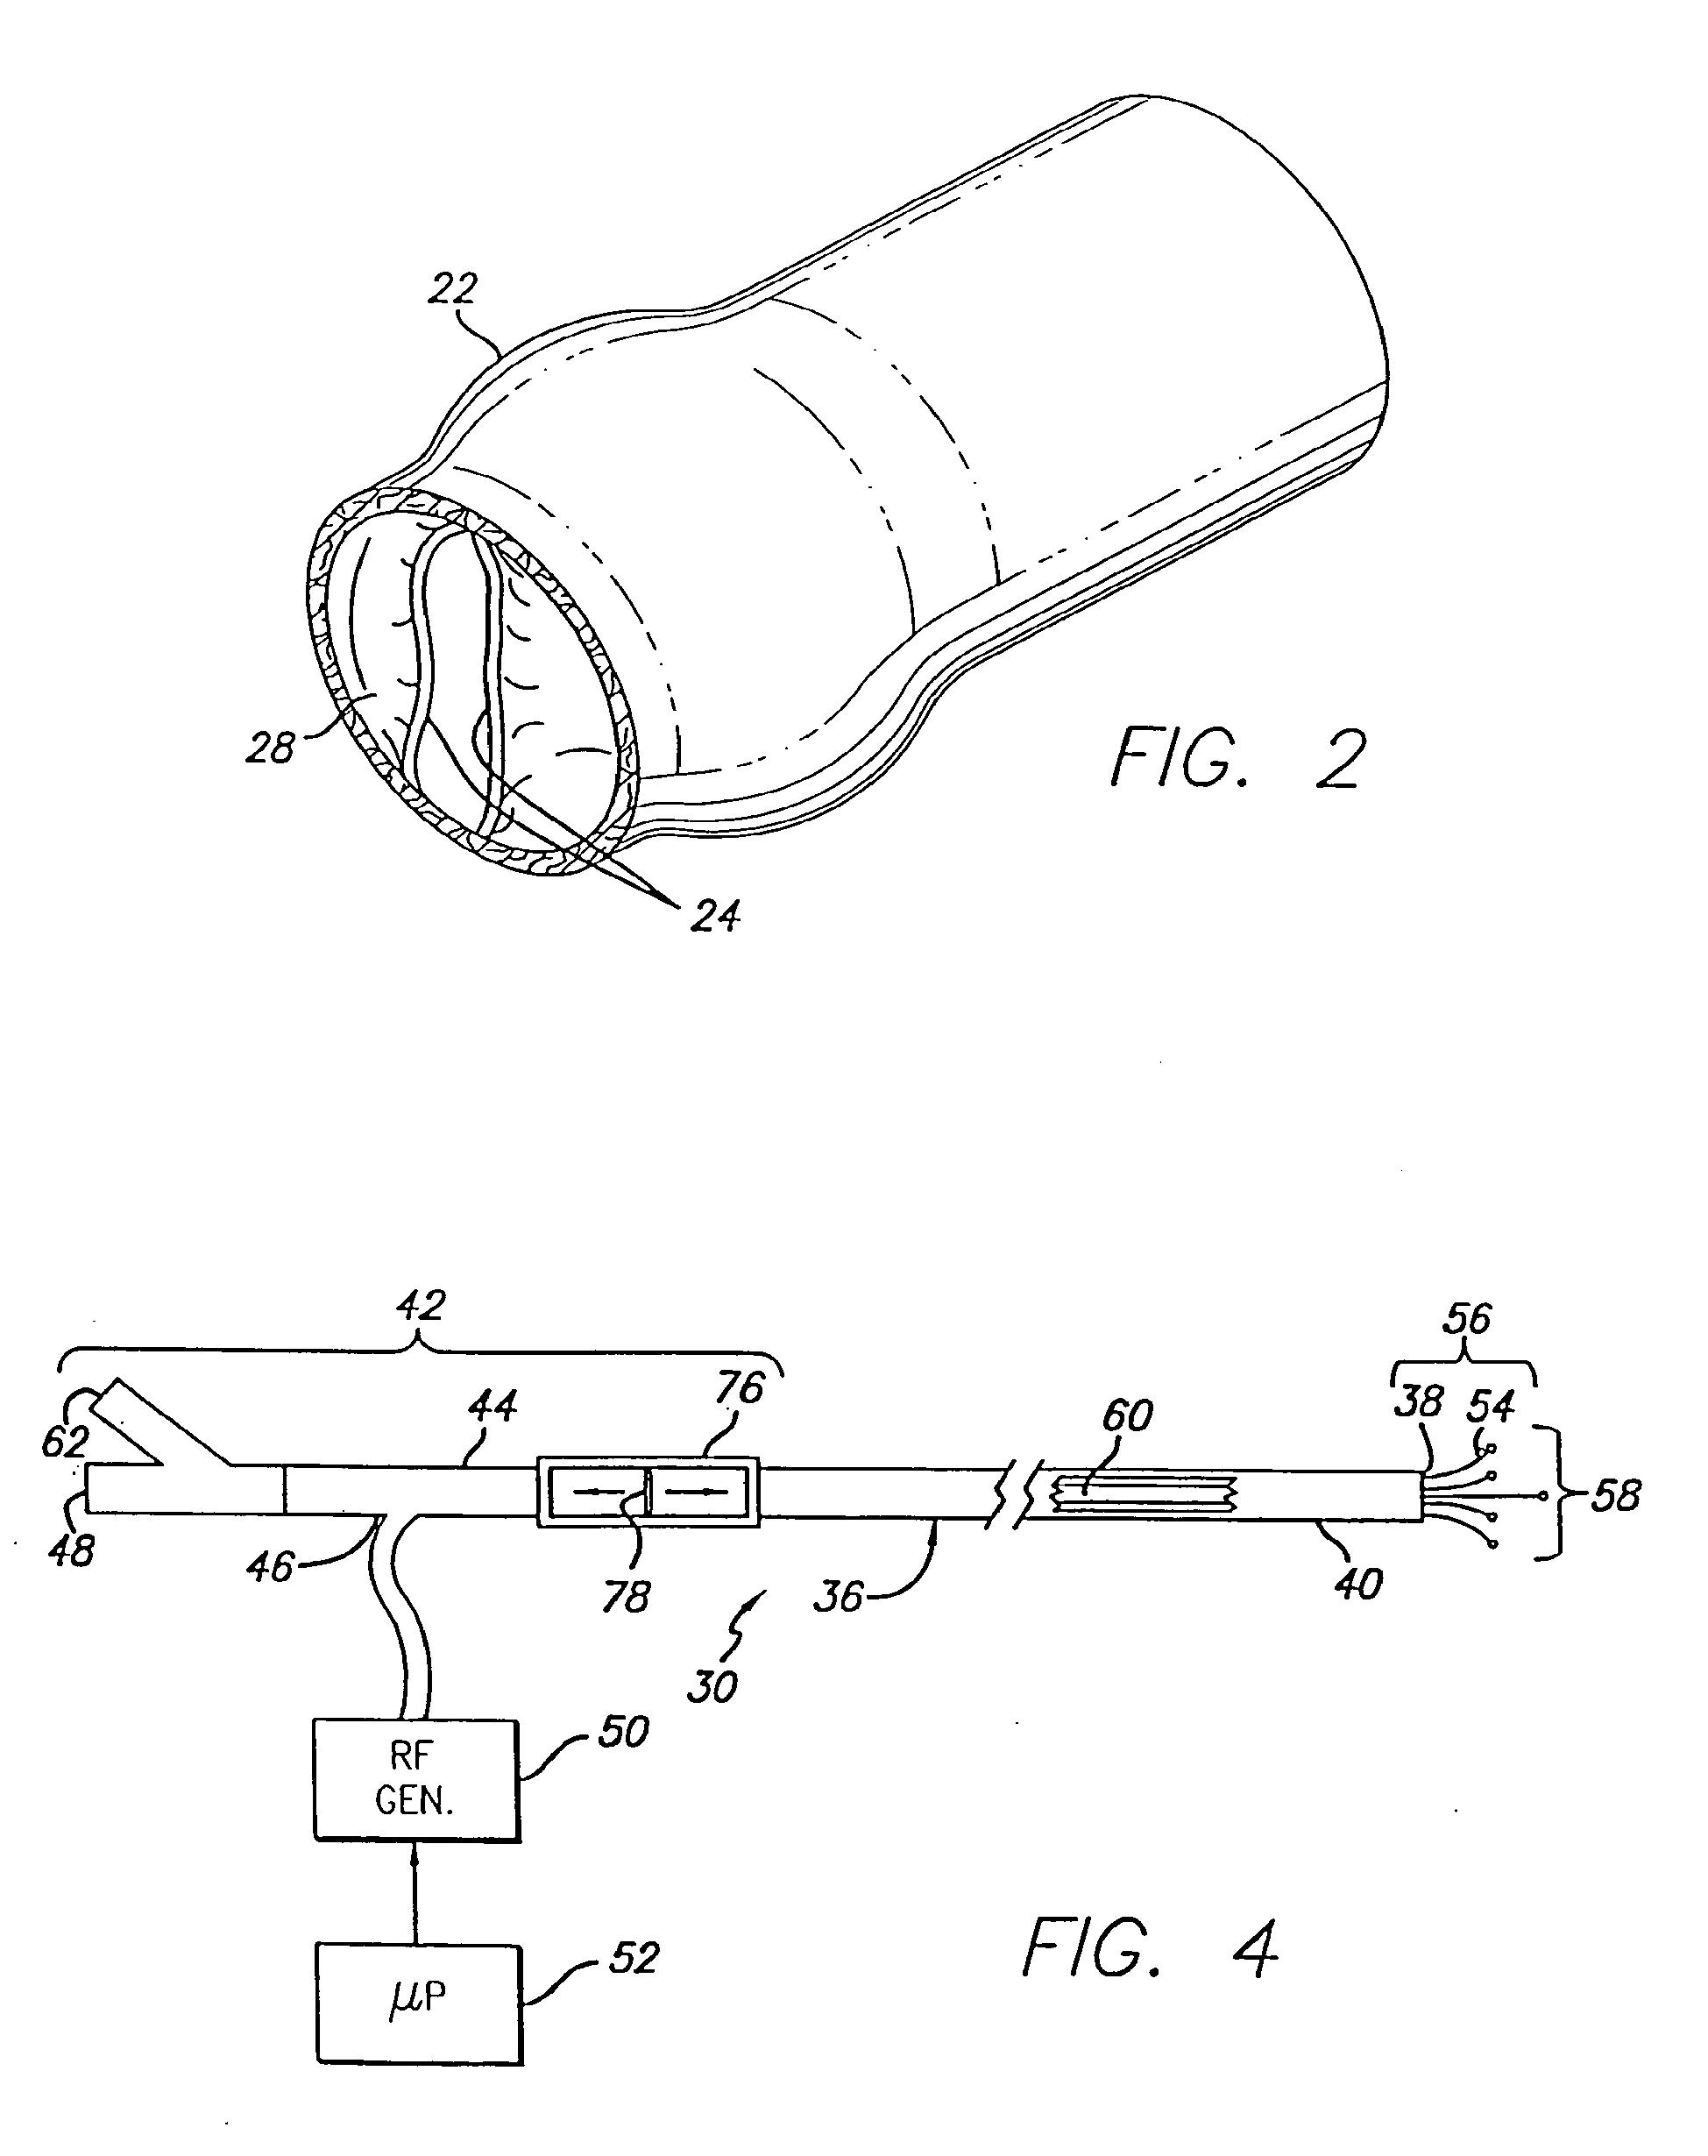 Method and apparatus for applying energy to biological tissue including the use of tumescent tissue compression